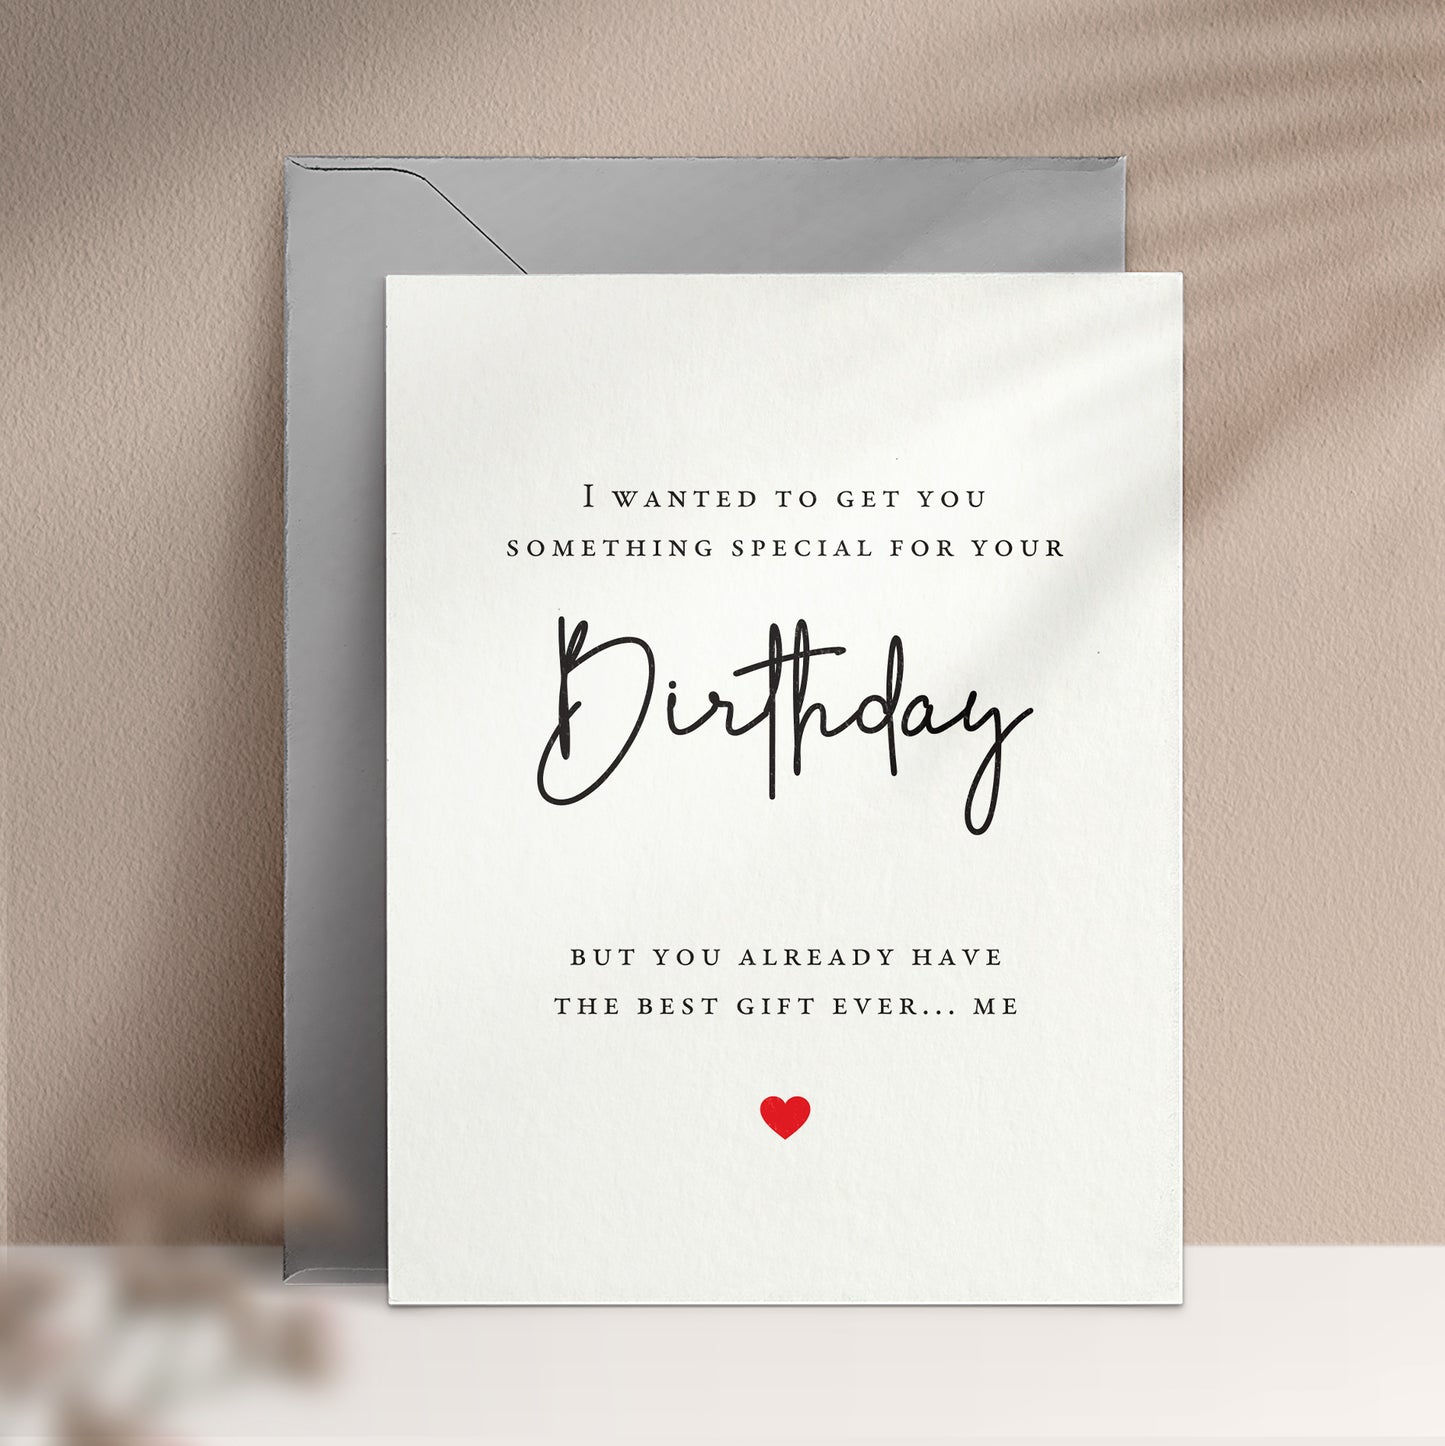 I wanted to get you something special but you already have me  birthday card - XOXOKristen